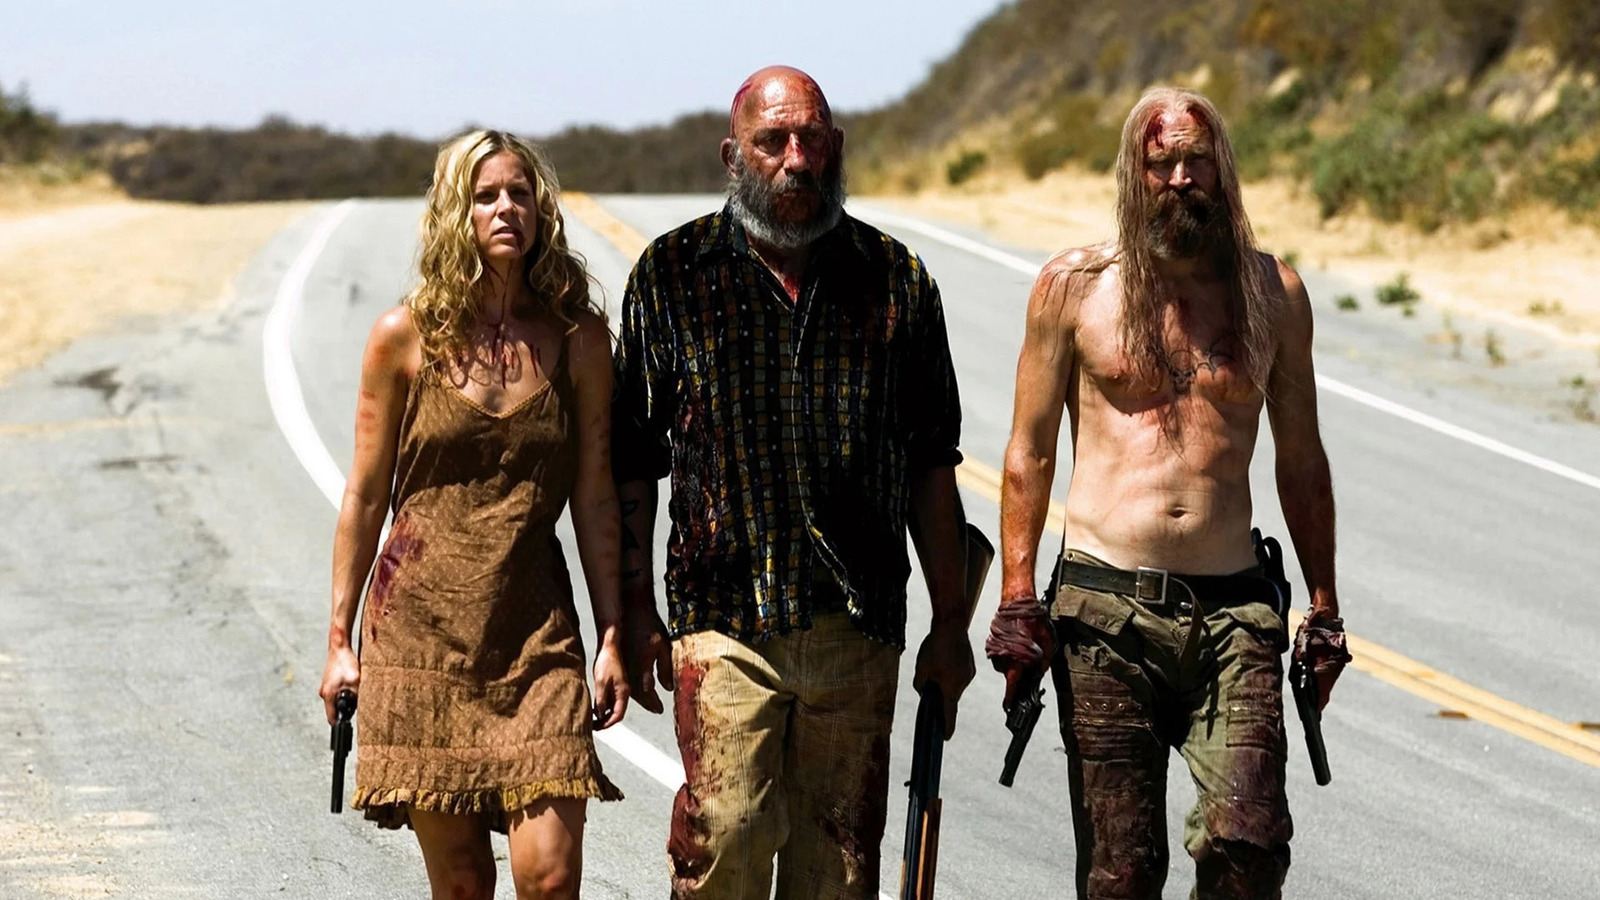 The Western Classics That Inspired Rob Zombie During The Devil's Rejects